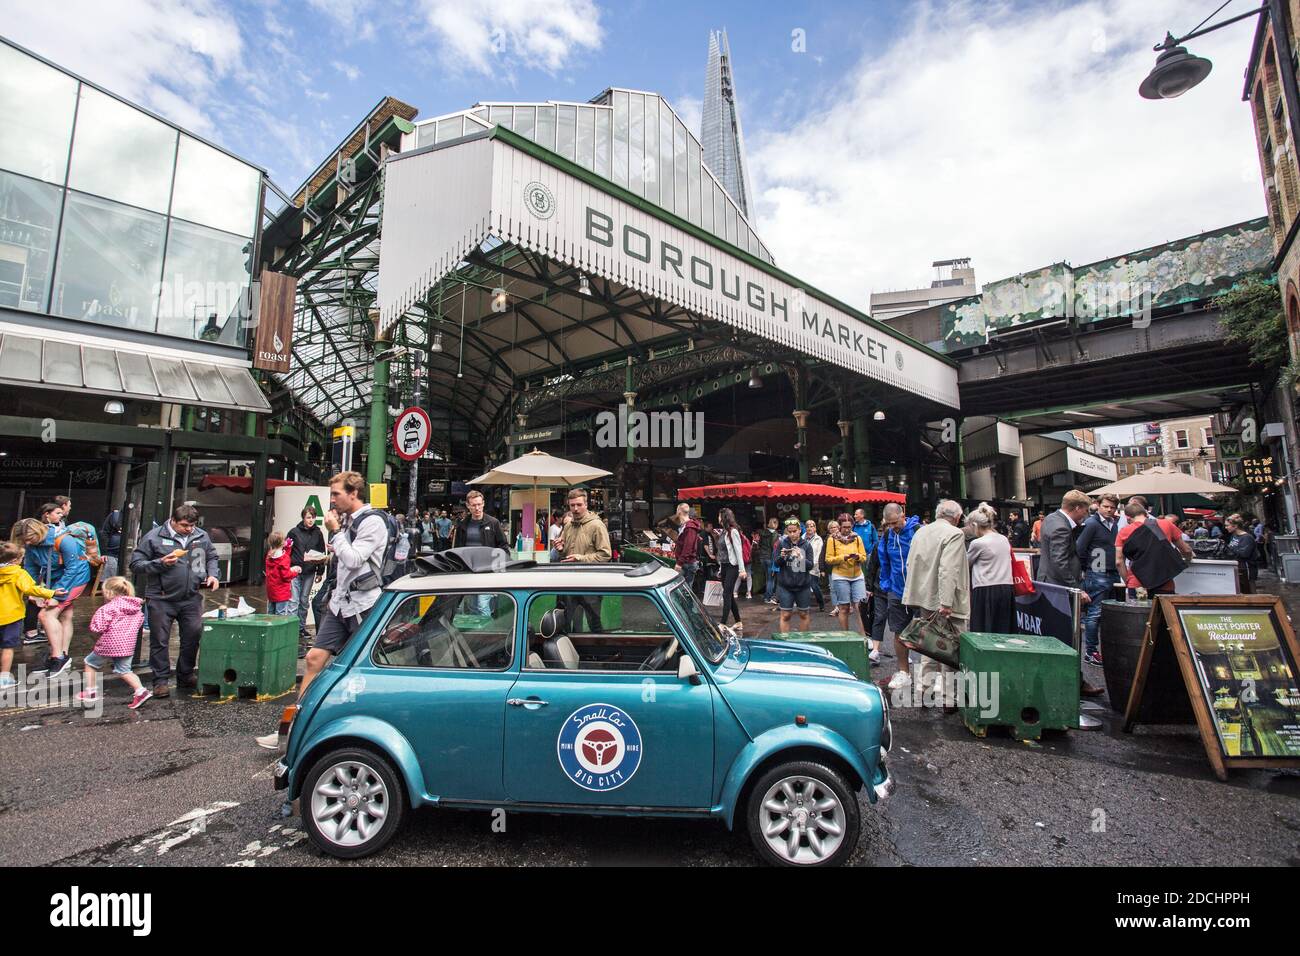 Great Britain / England /London / Mini motor car parked on street in fron of Borough Market. Stock Photo